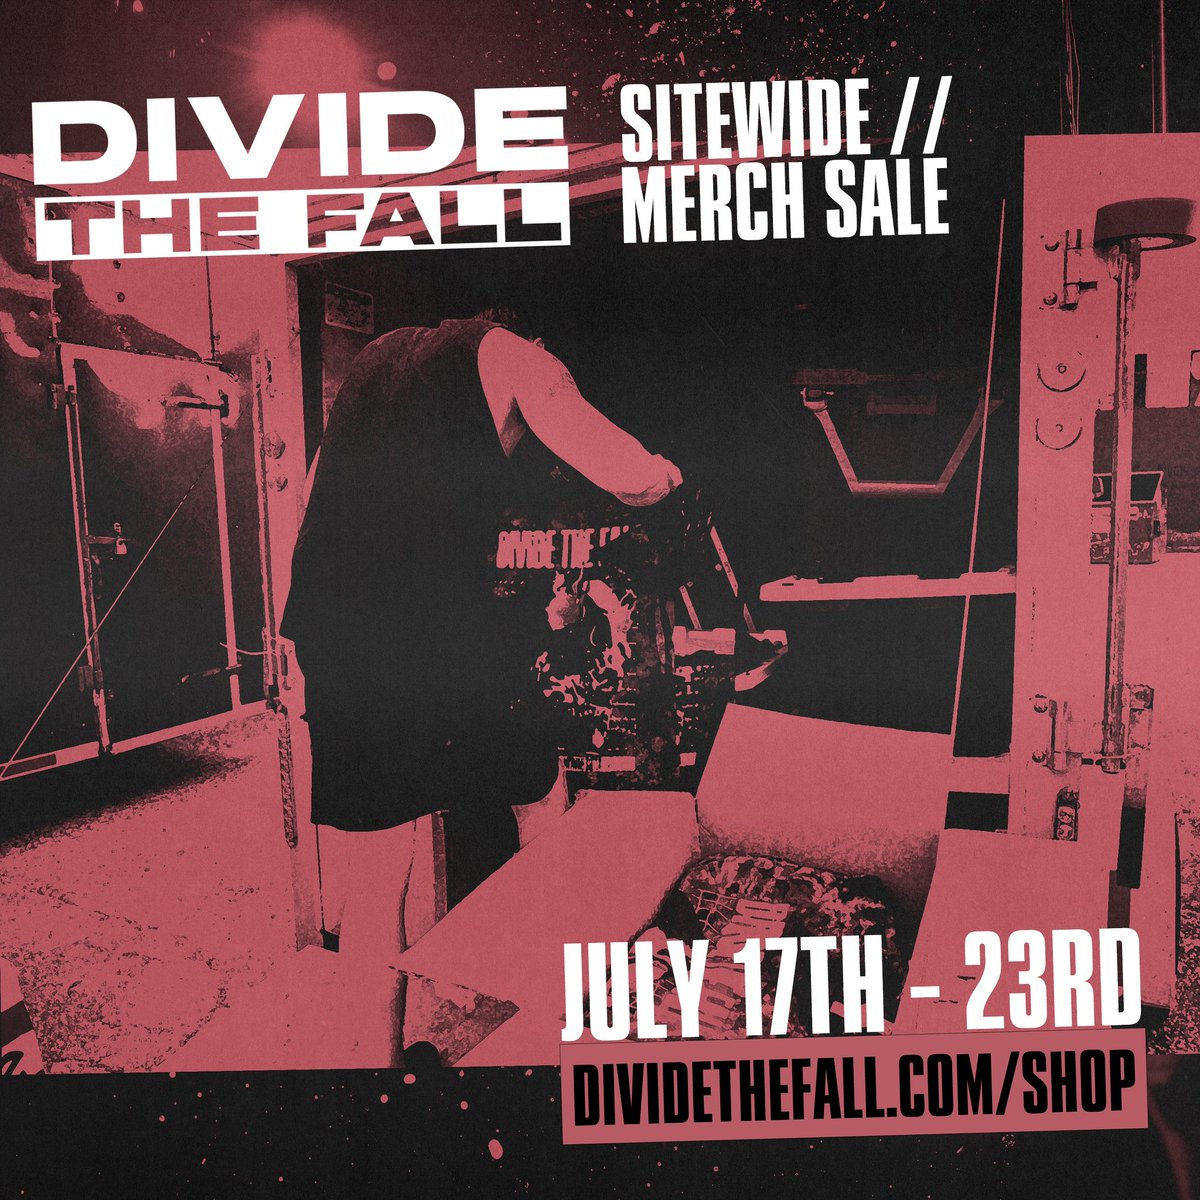 Everything on dividethefall.com is on sale. ‼️1 WEEK ONLY‼️ Select items will be discontinued after they sell out so get it while it’s hot 🔥